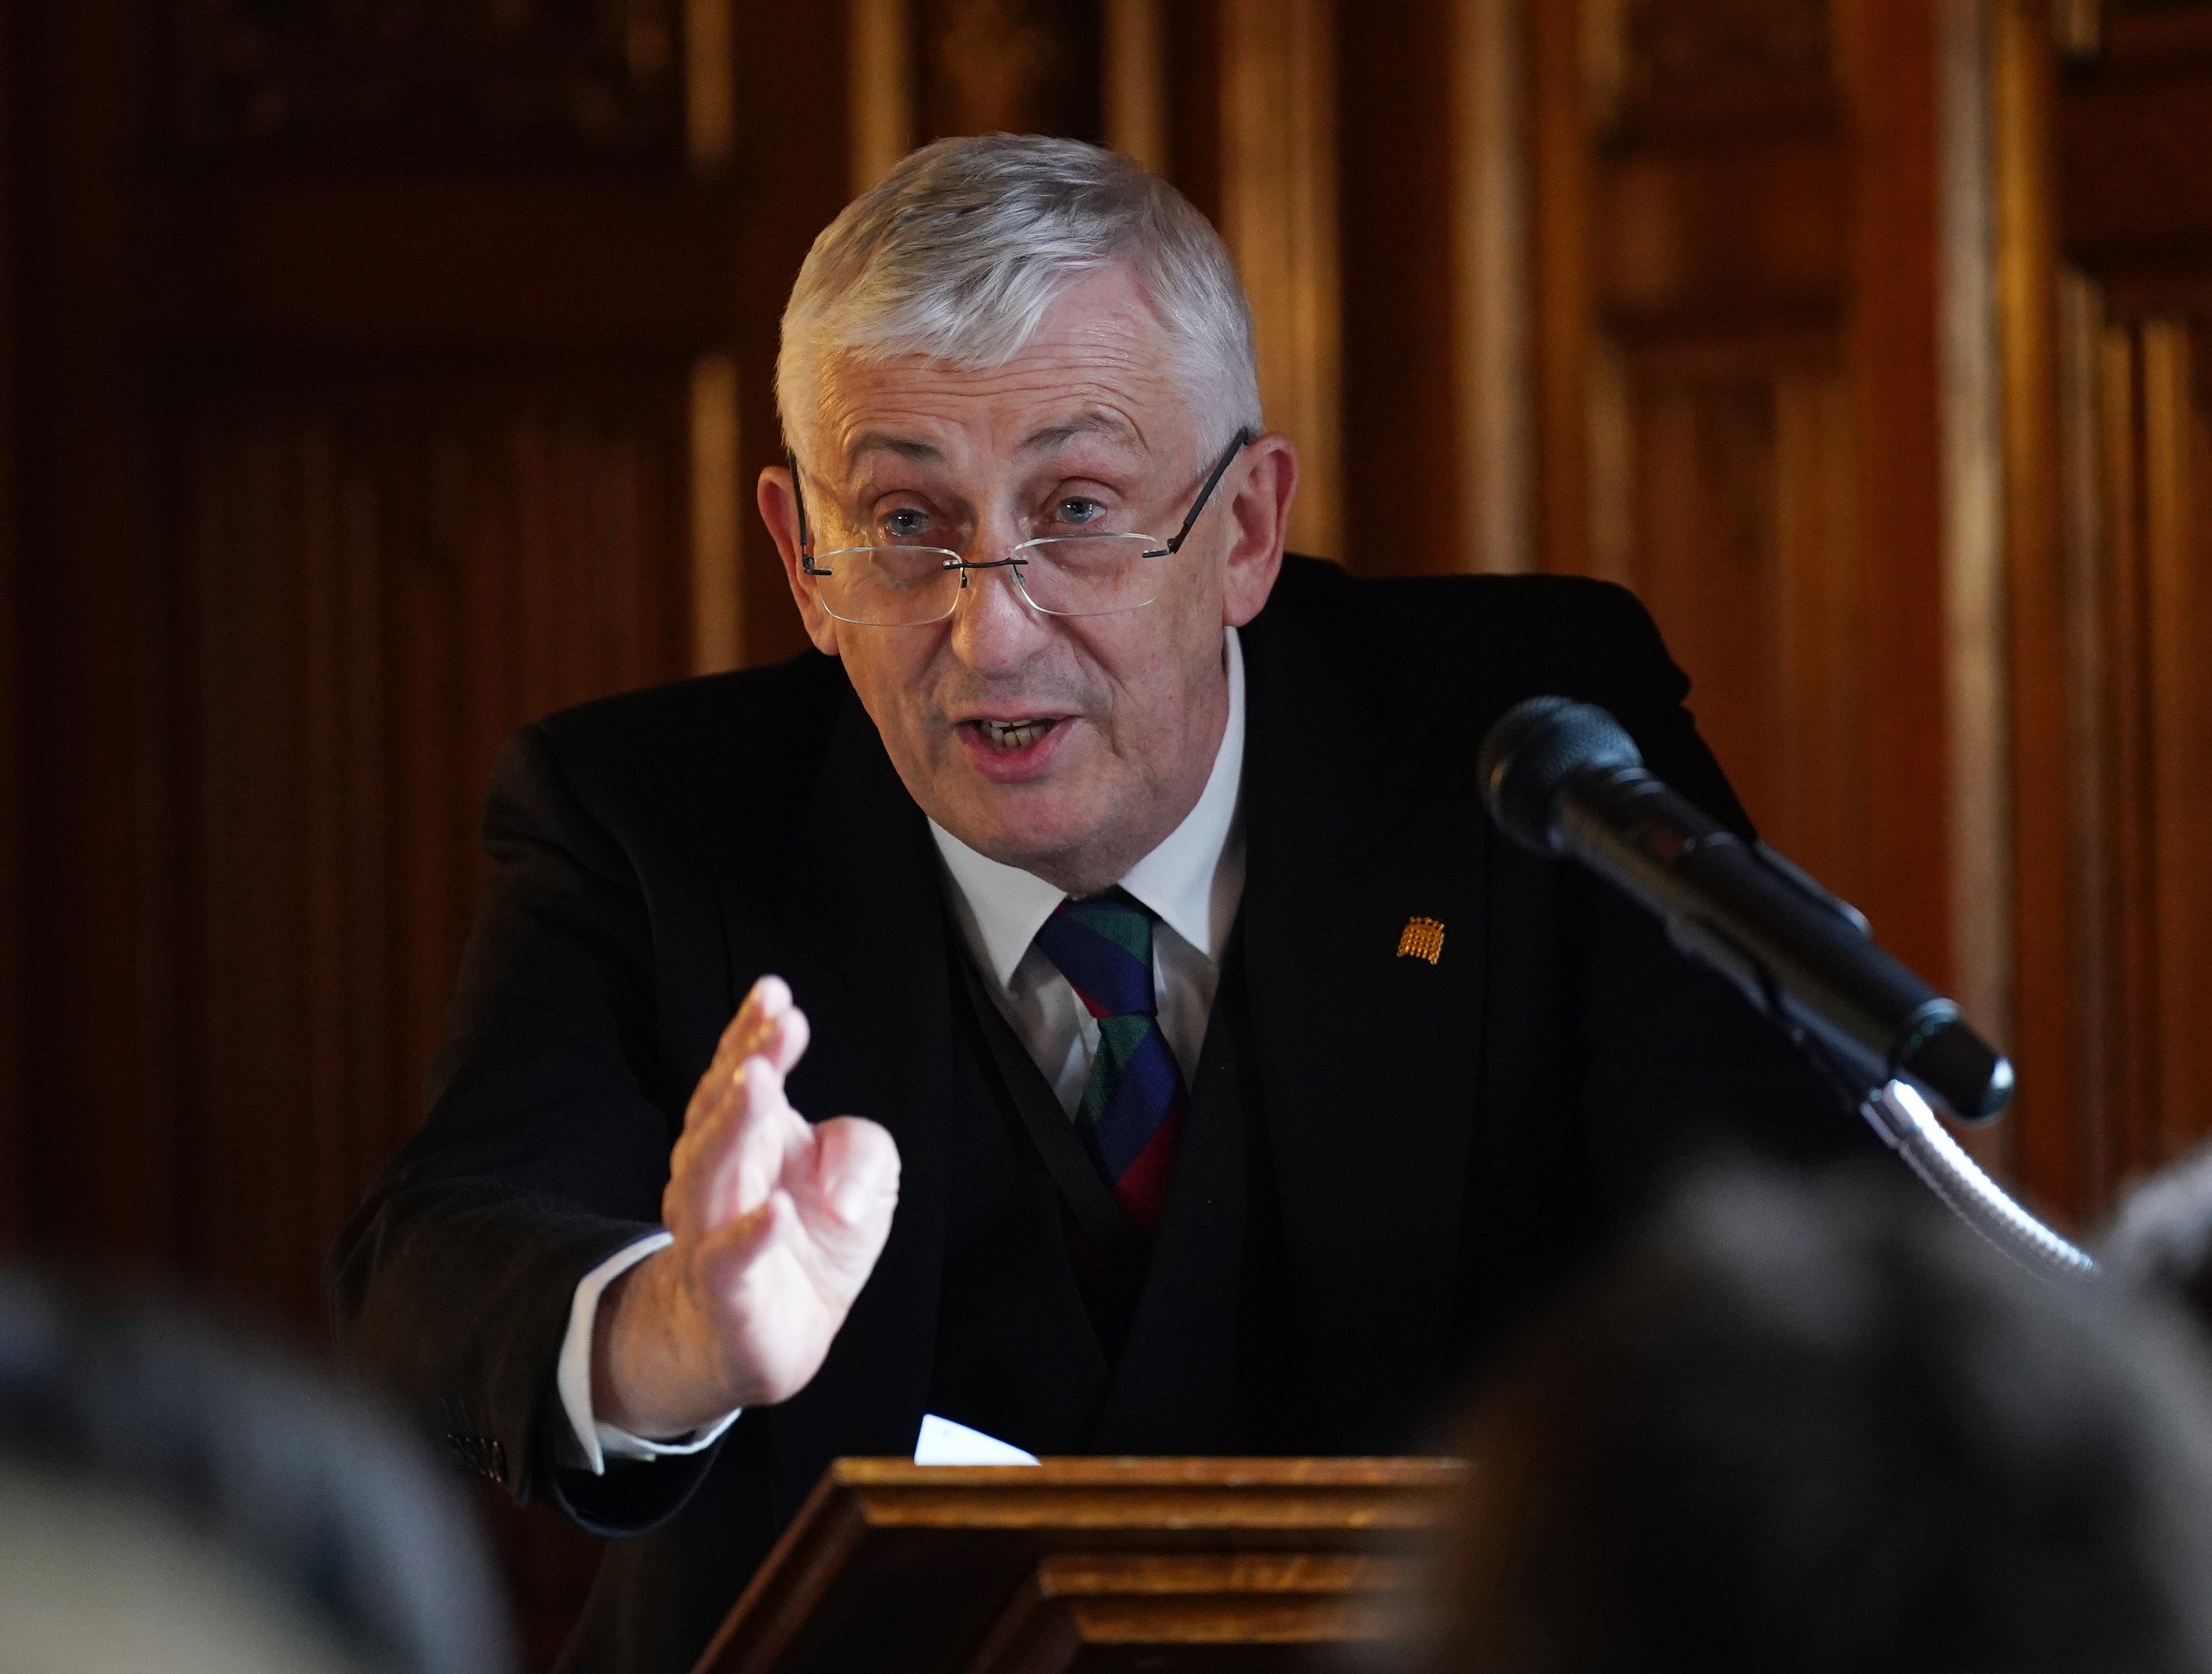 Commons Speaker Sir Lindsay Hoyle has said the forthcoming recess period should be cut short to push on with business following a pause in politics in the wake of the Queen’s death (Yui Mok/PA)